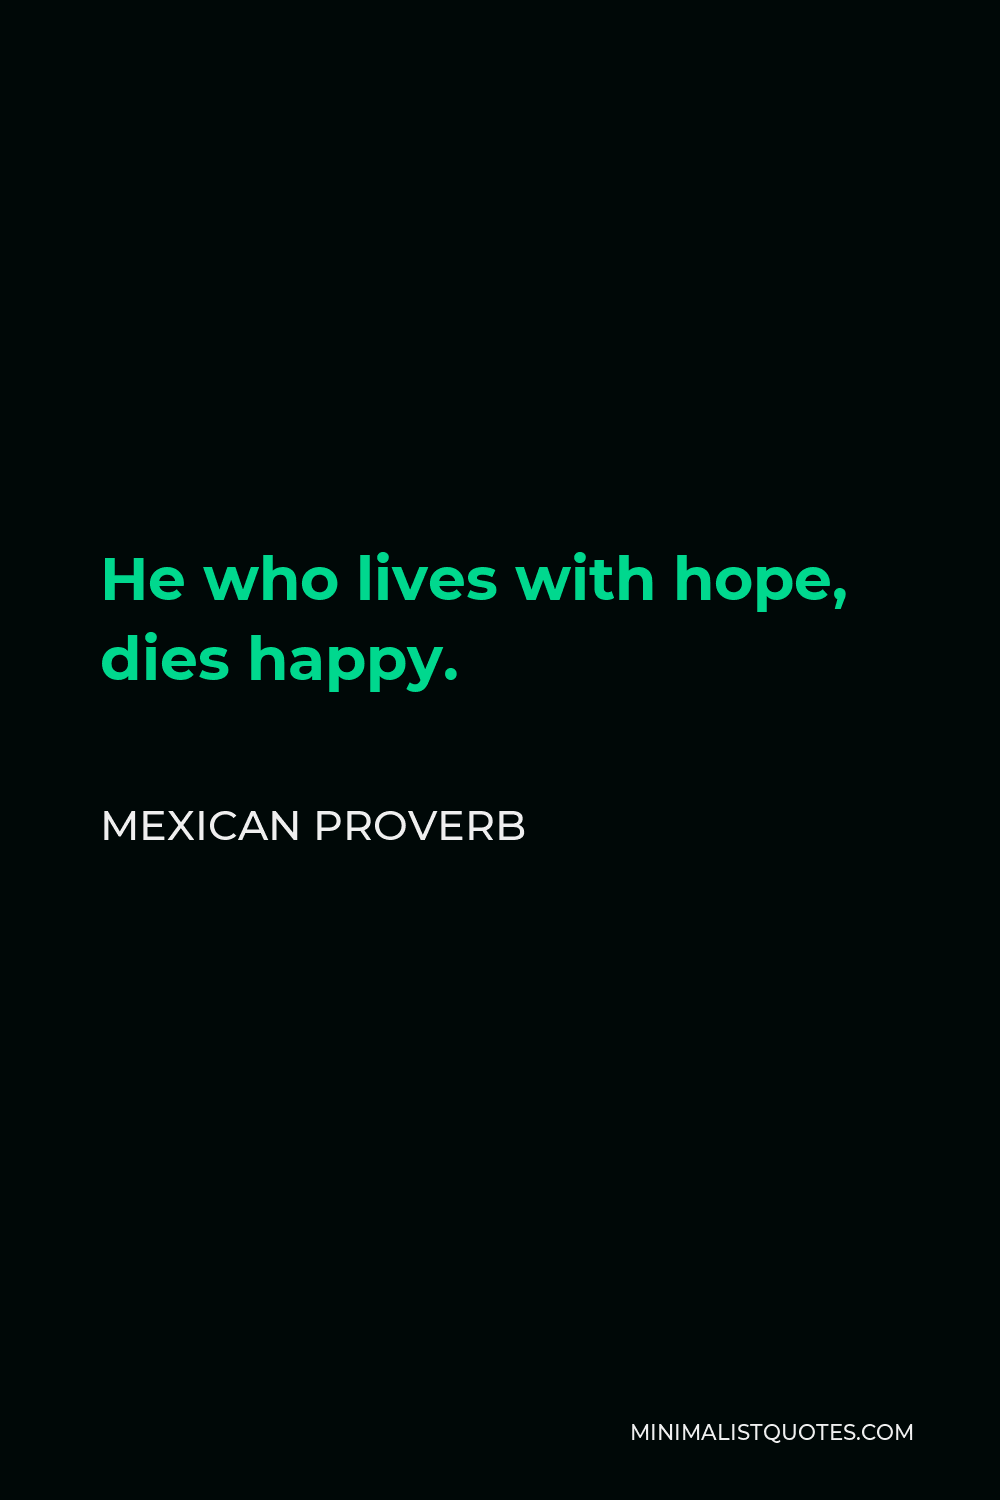 Mexican Proverb Quote - He who lives with hope, dies happy.